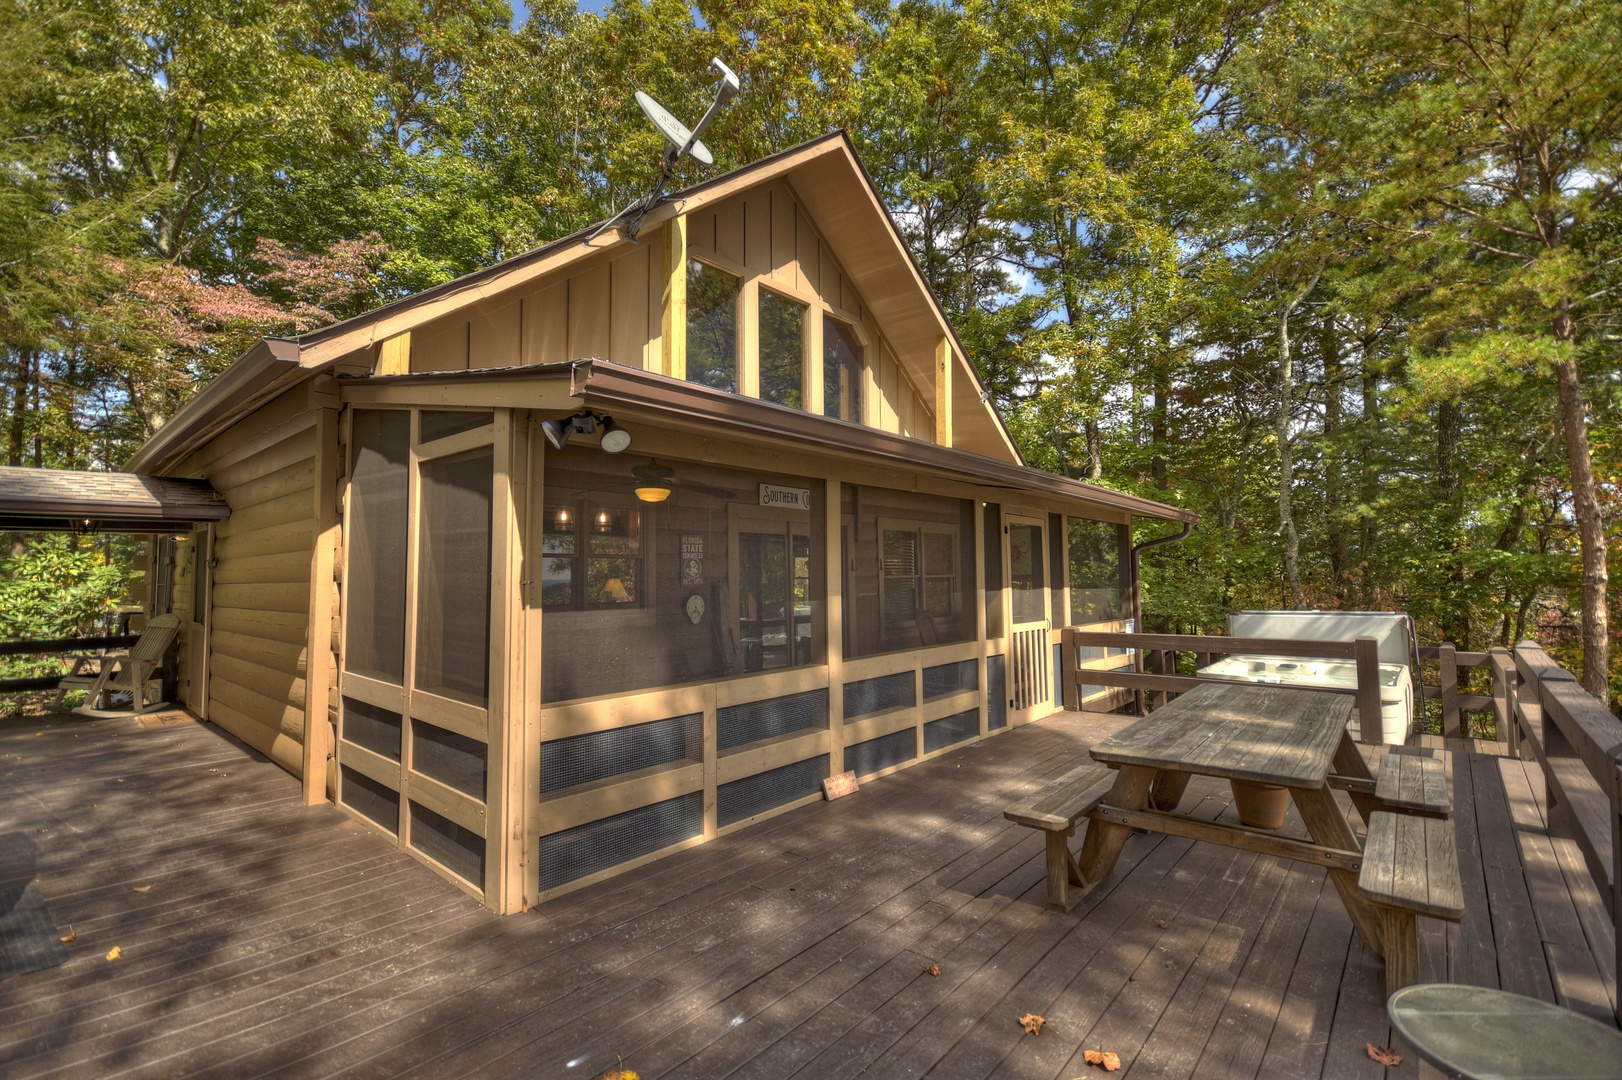 Peaceful, Easy Feeling - Screened In Deck and Open Deck Space